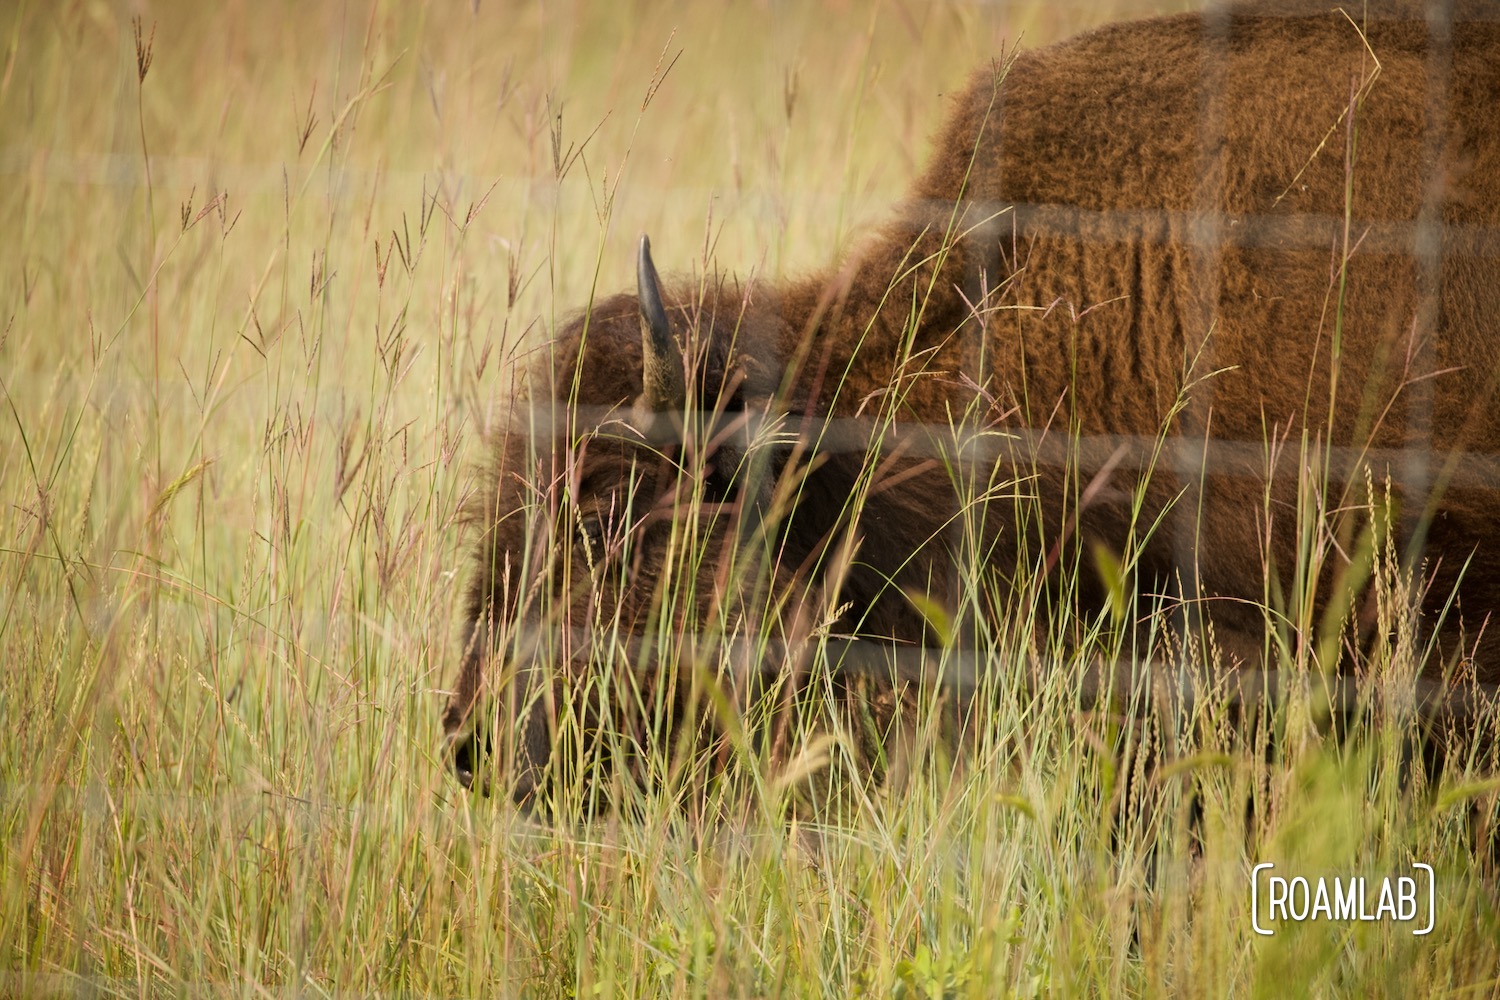 Bison head obscured by tall grasses .